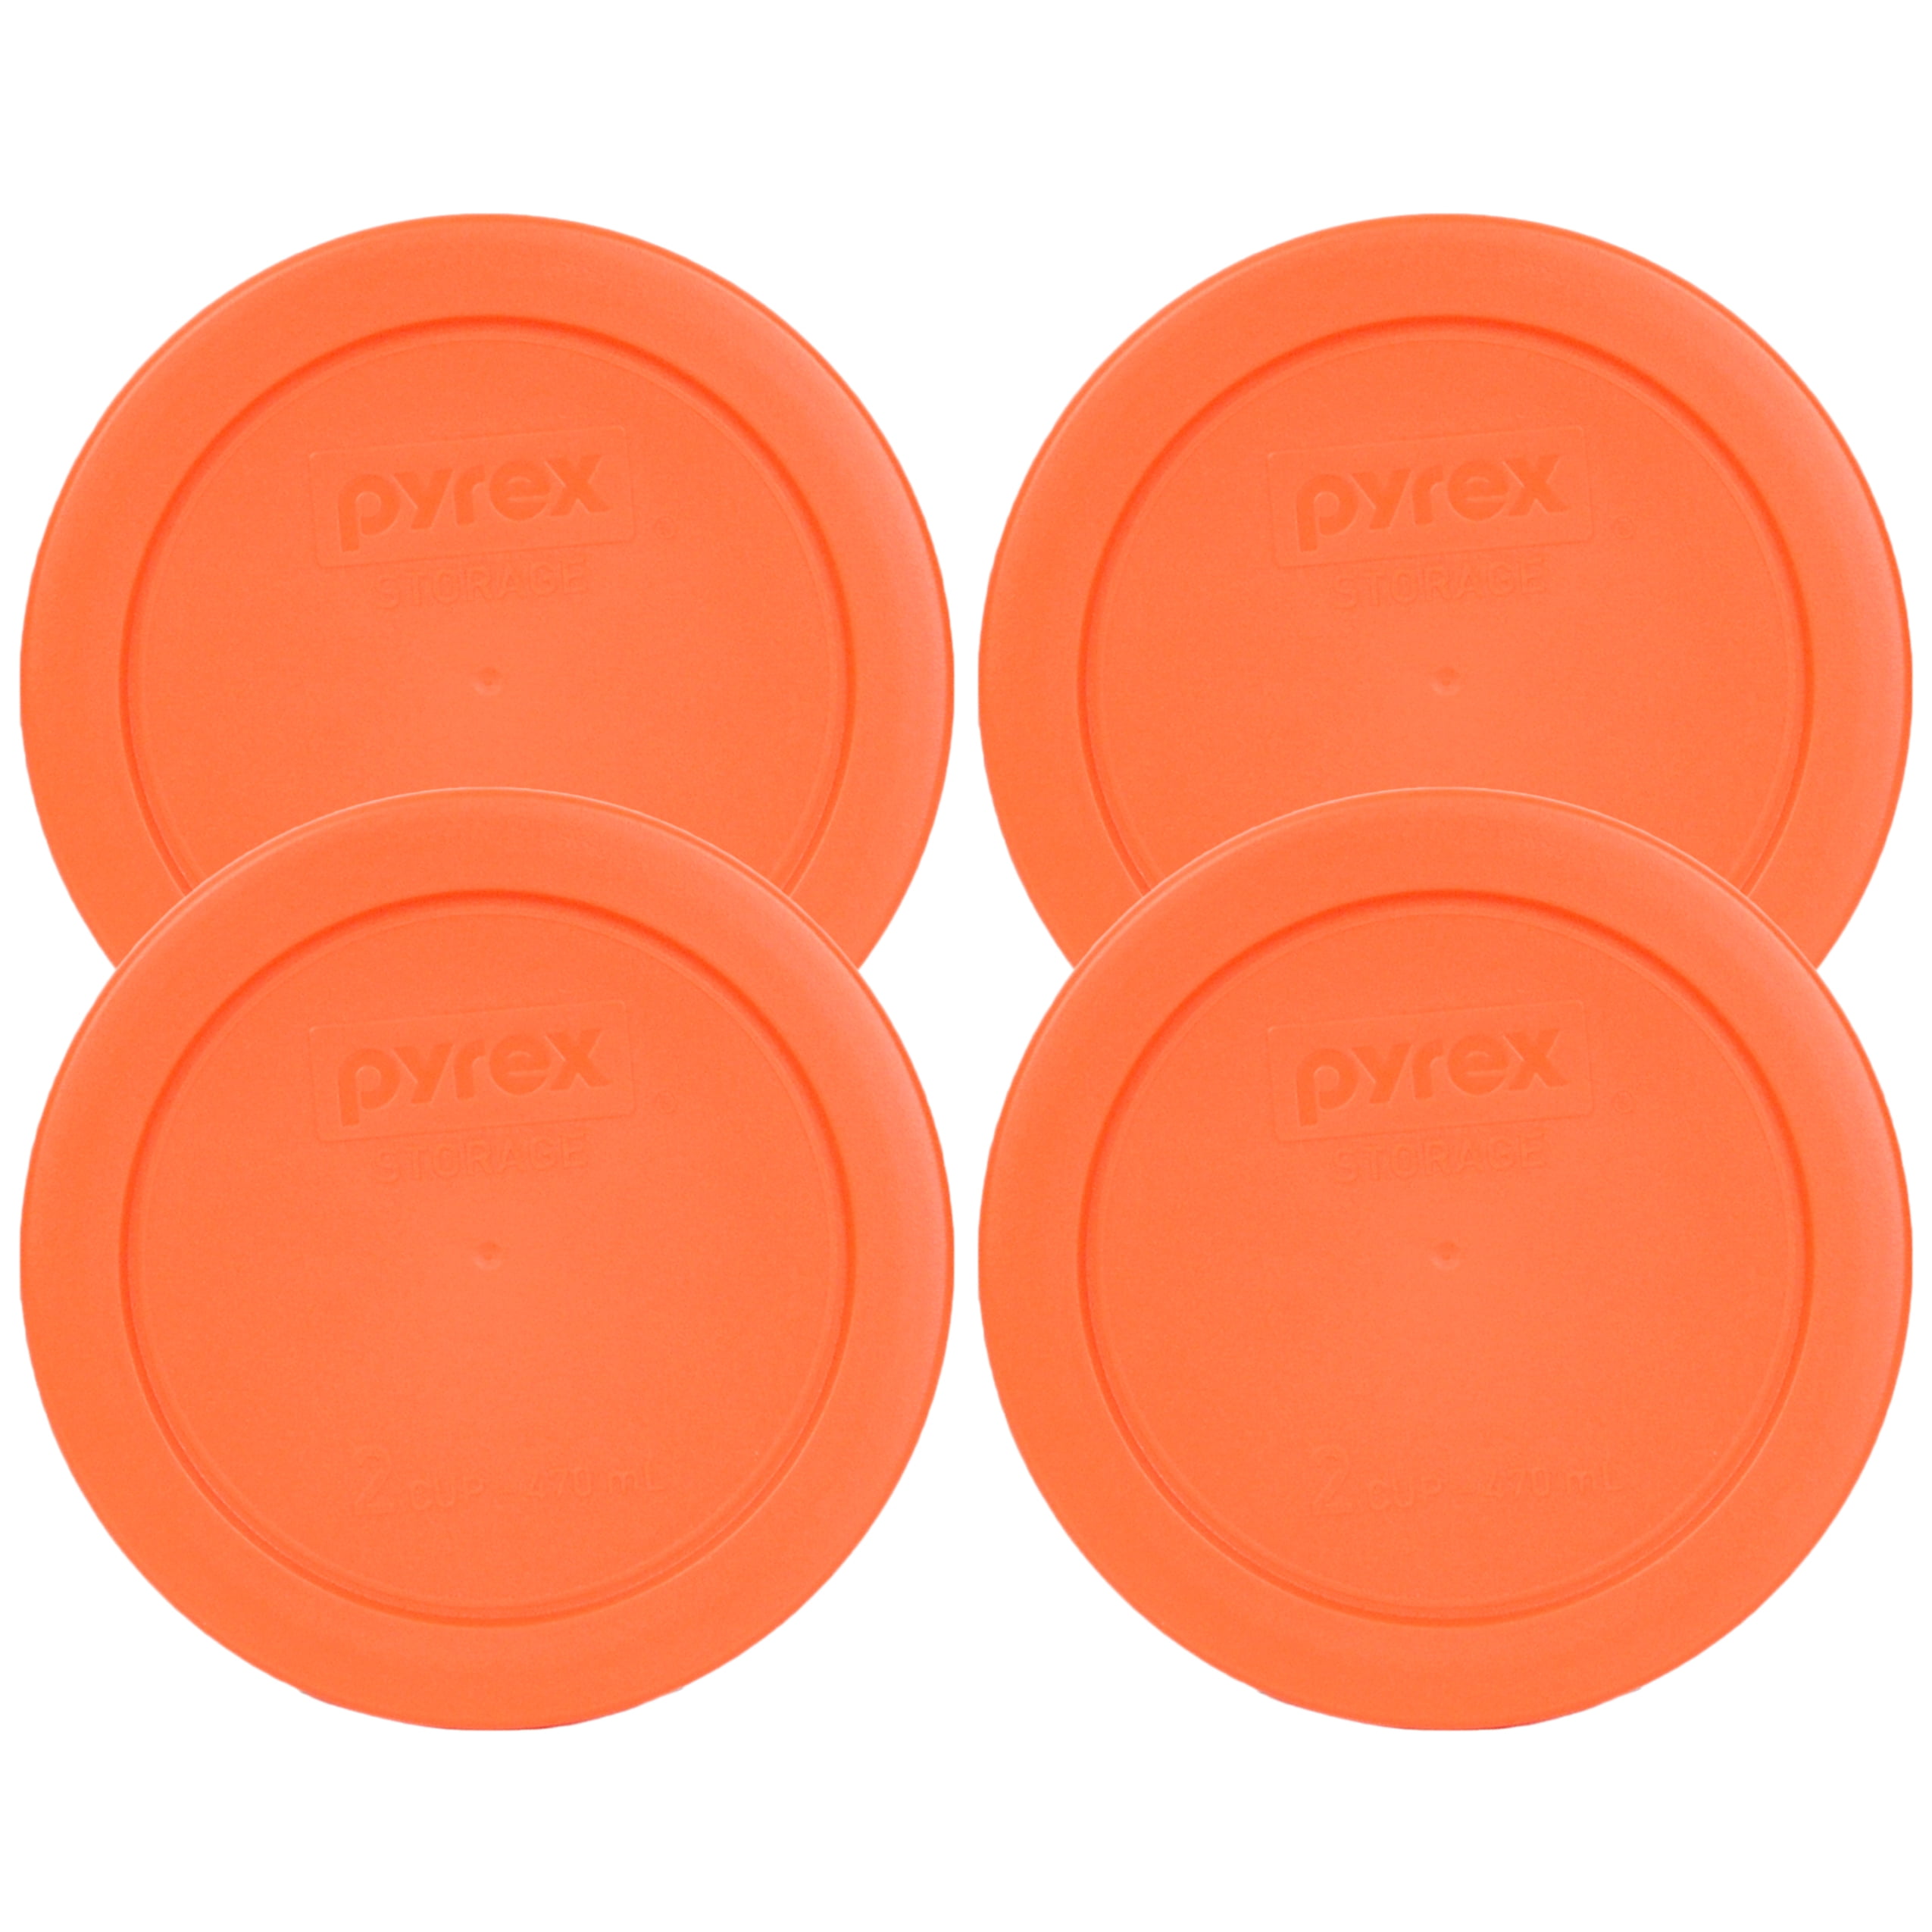 Pyrex 7200-PC 2 Cup Round Cover Orange Pack of 4 